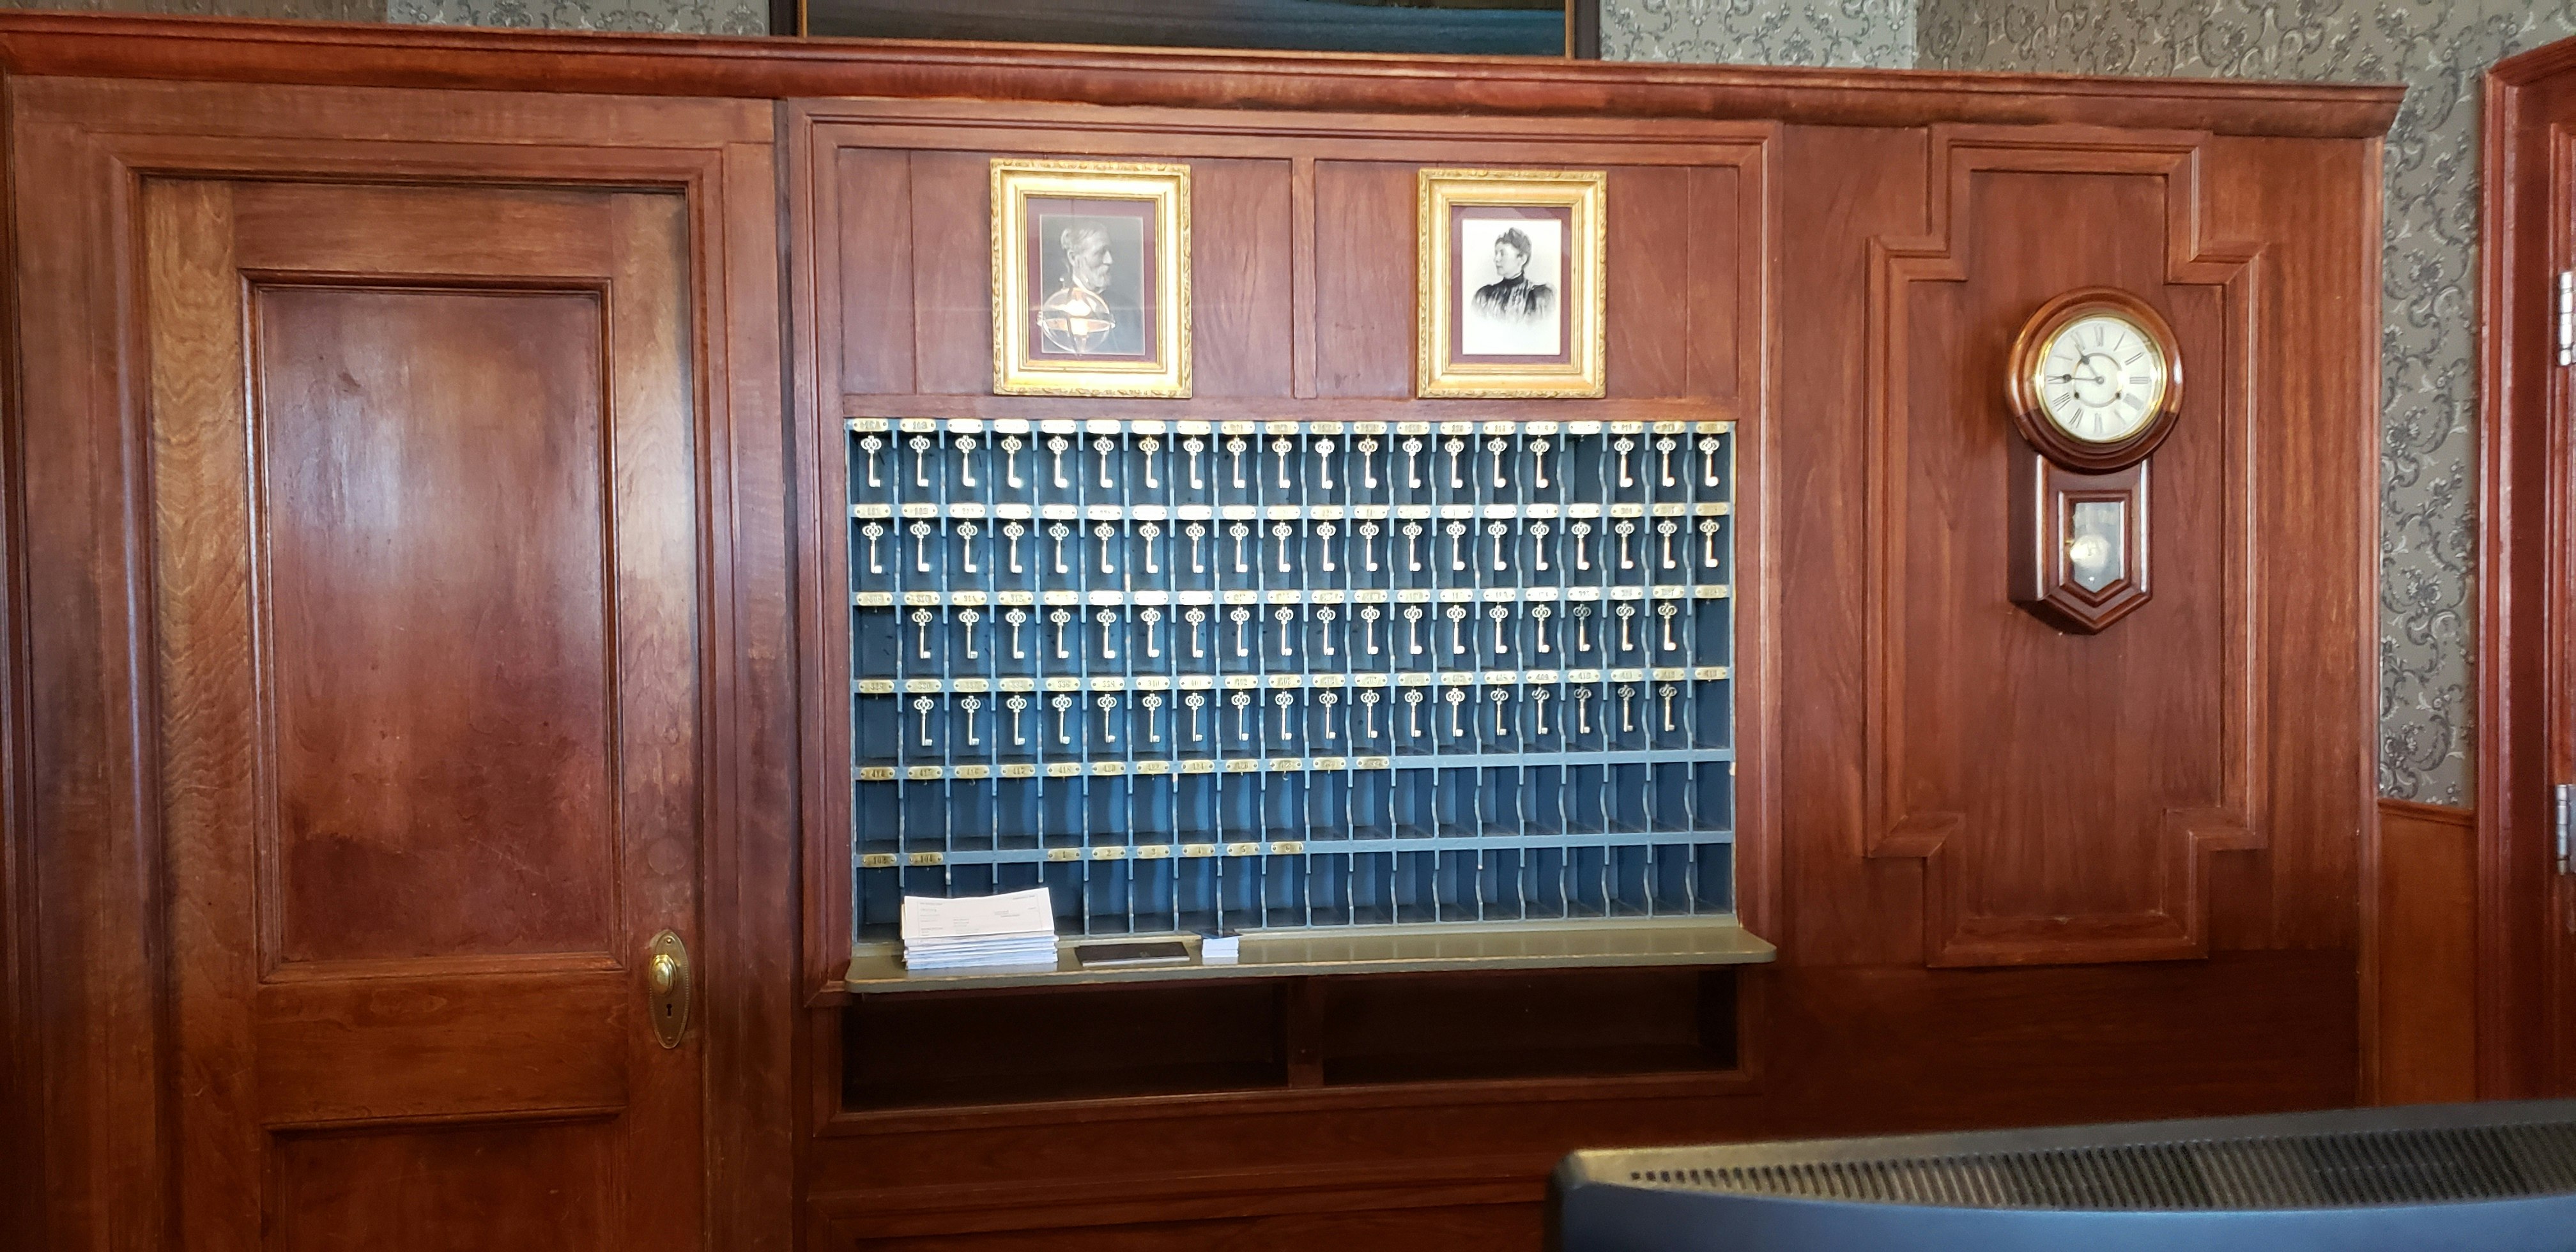 Photos of Freelan Oscar Stanley and his wife Flora in The Stanley Hotel above replicas of the original hotel room keys